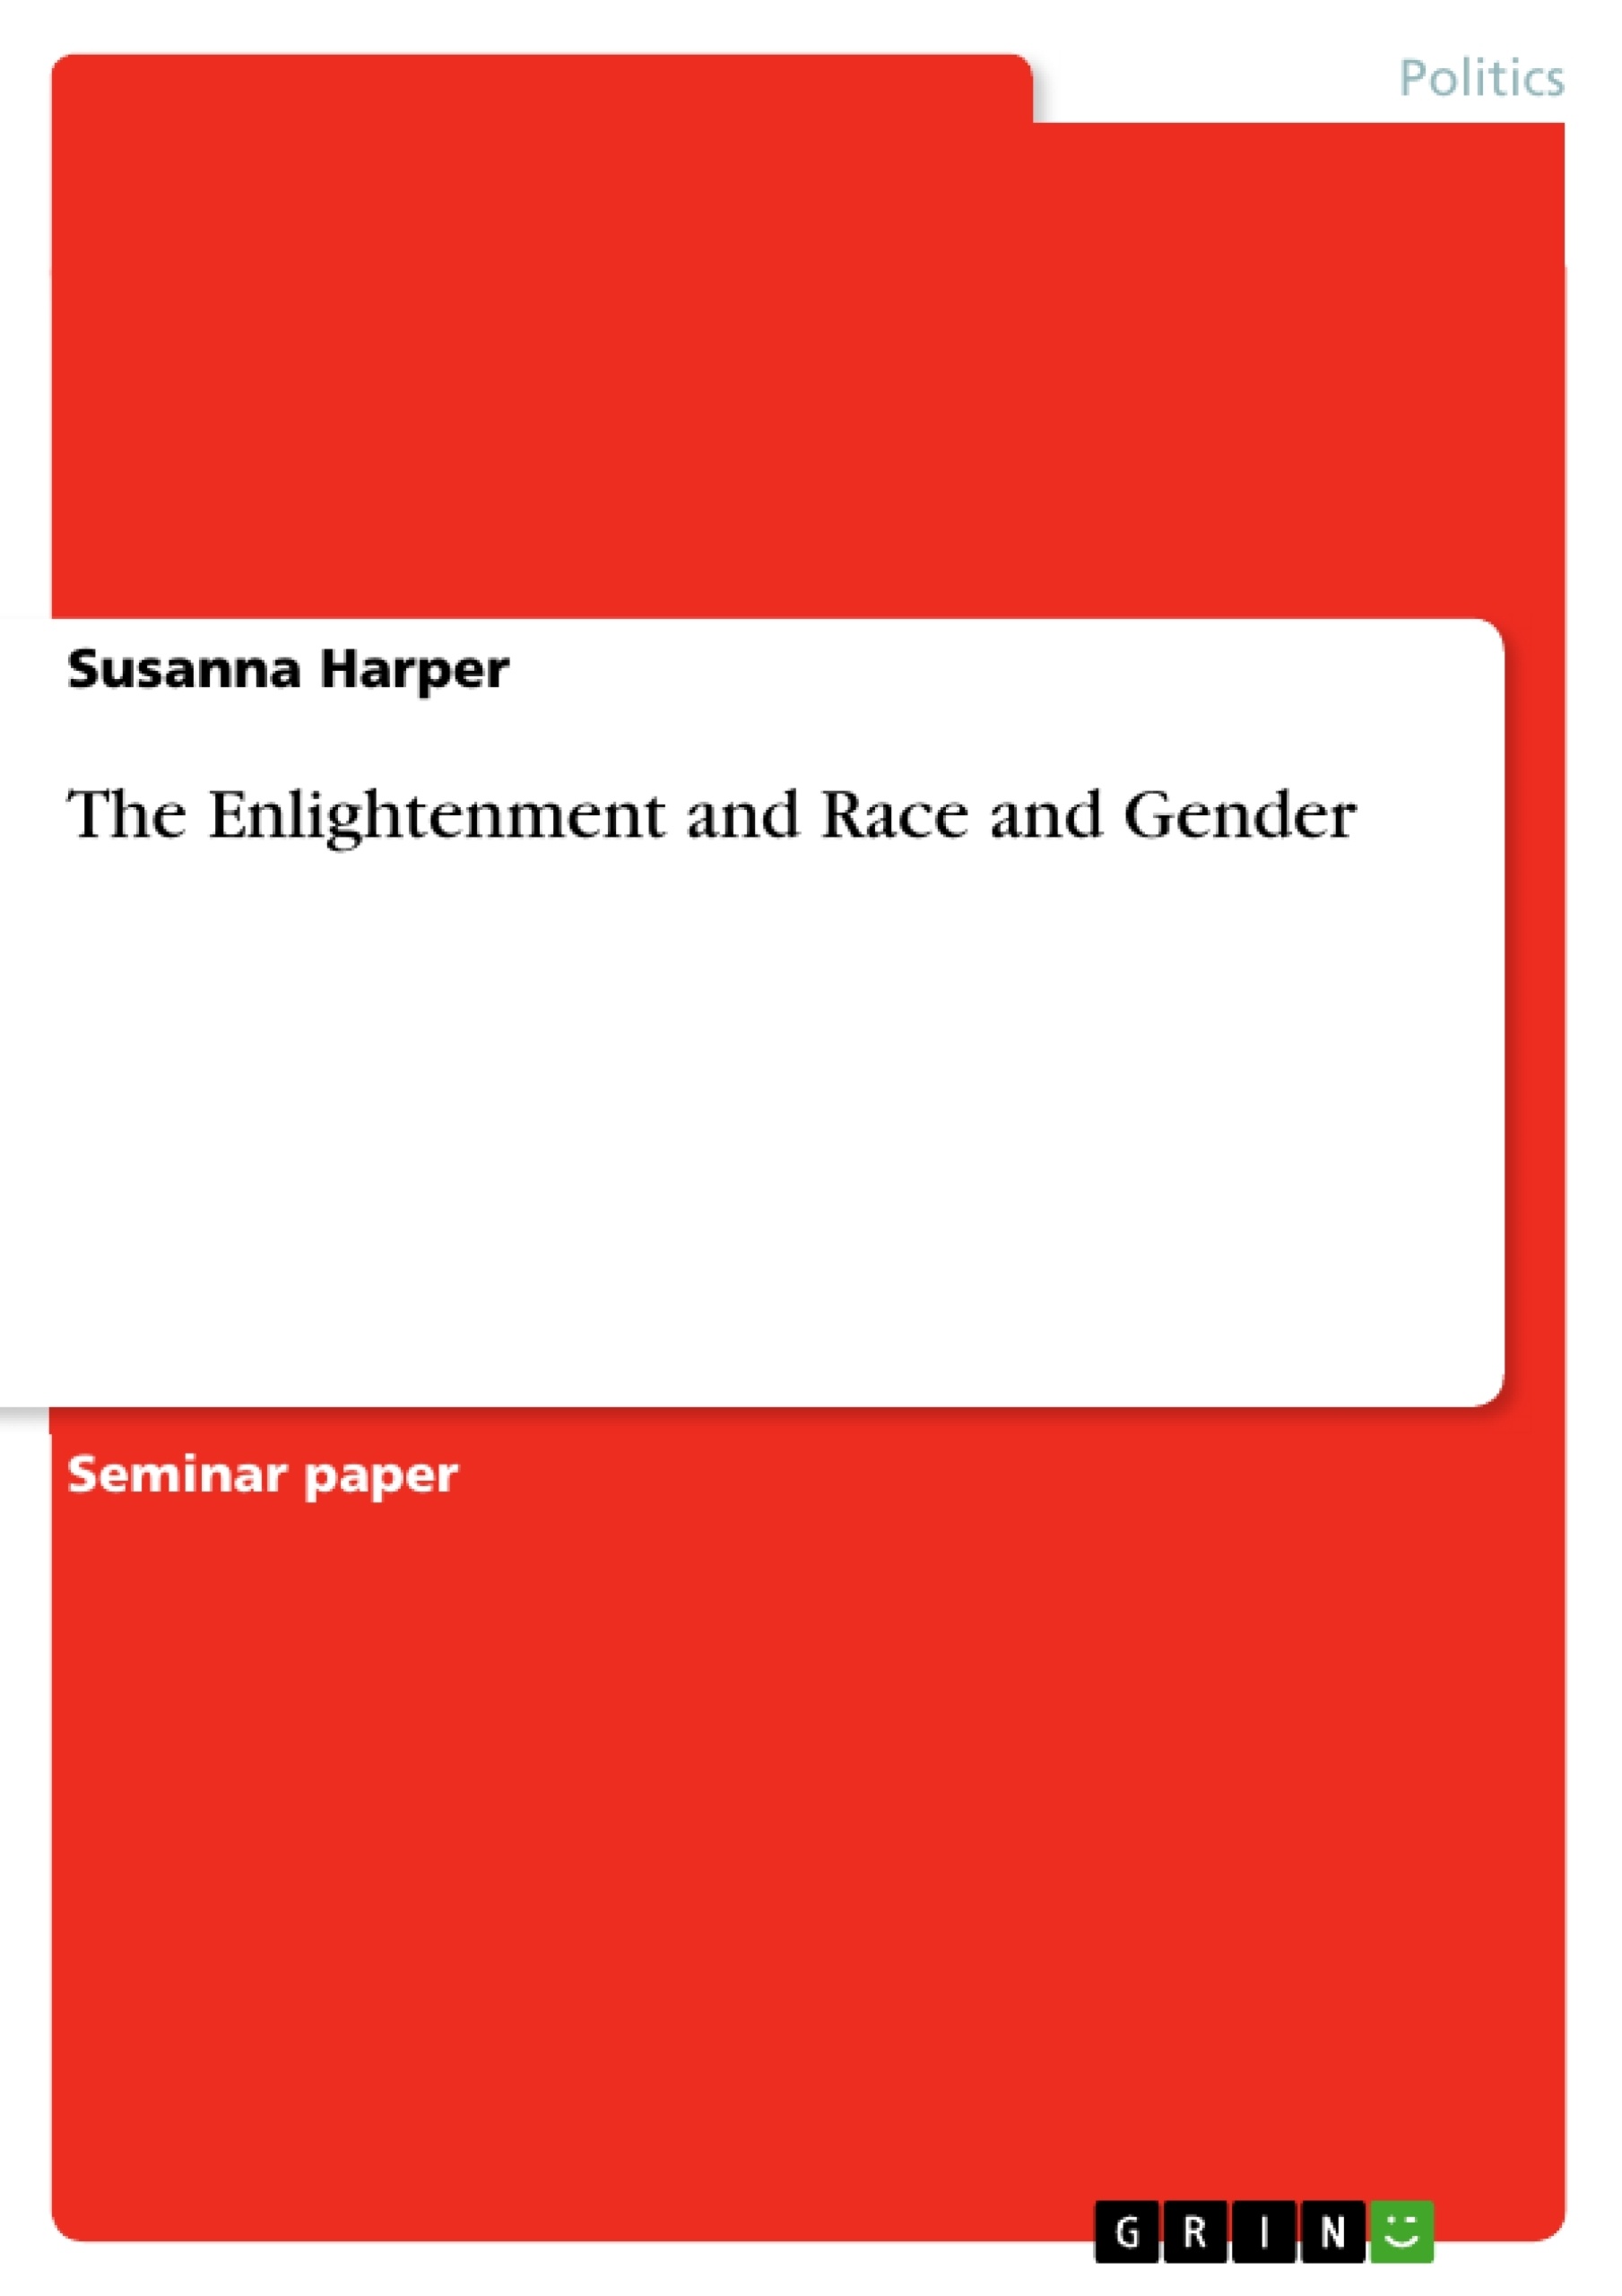 Title: The Enlightenment and Race and Gender